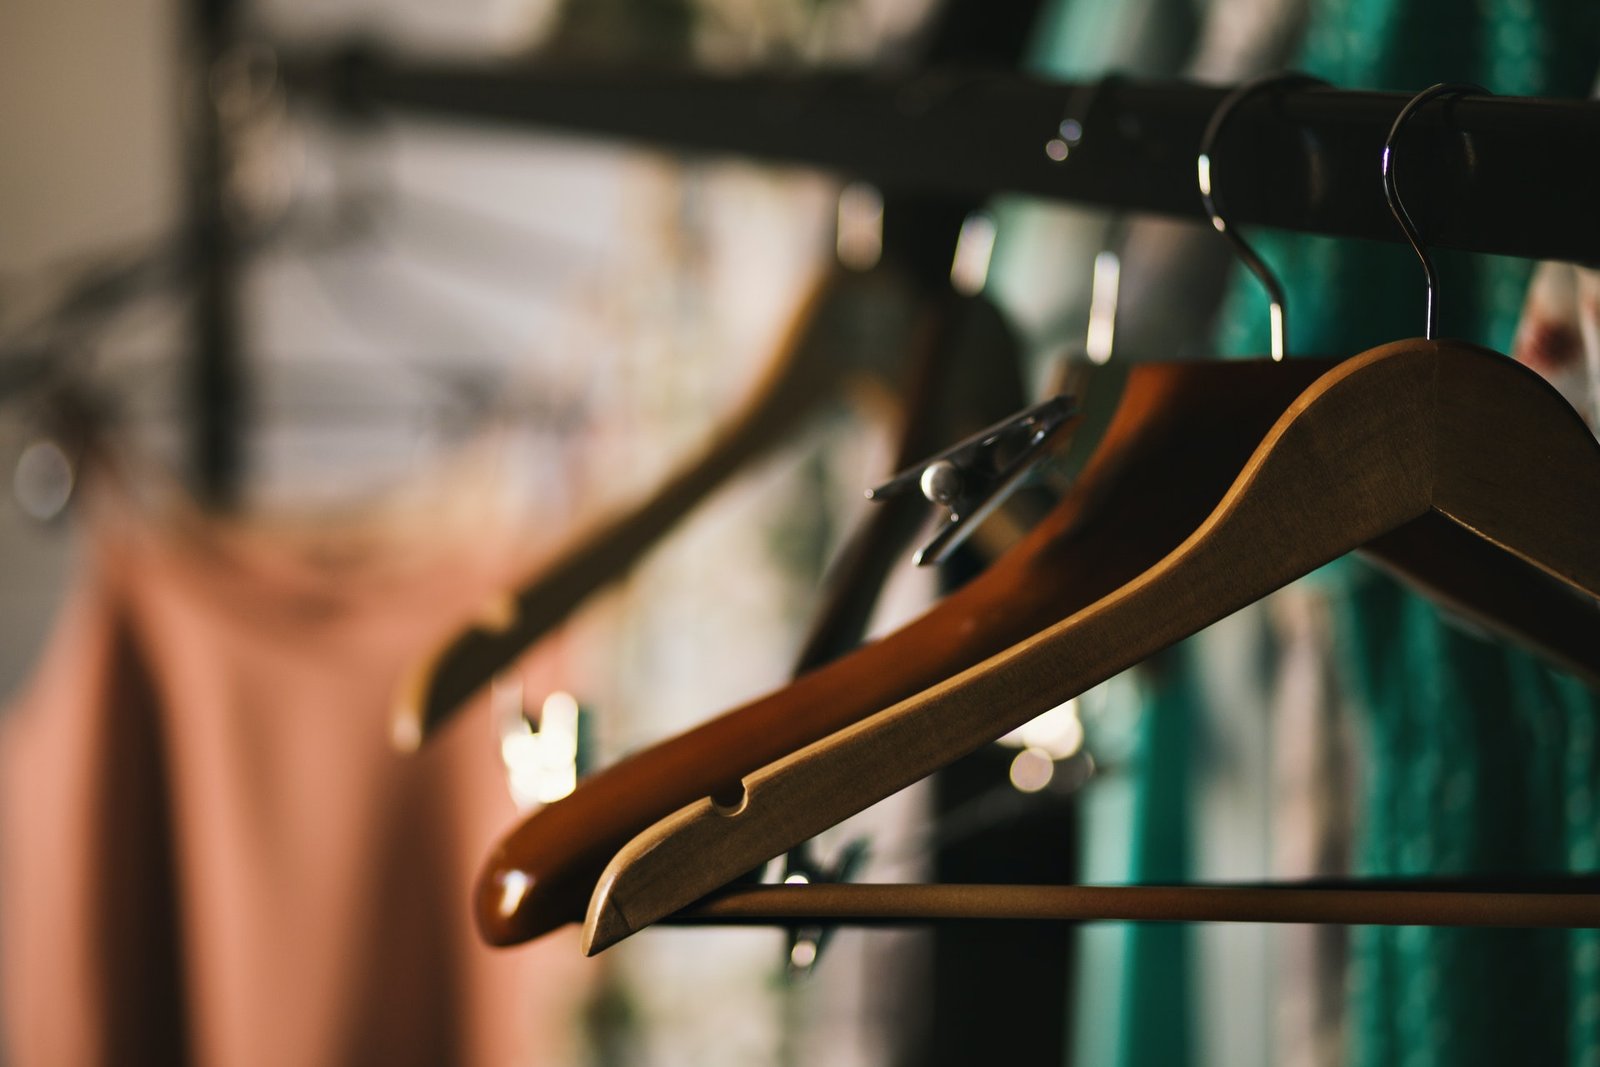 Hangers On -The proper way to “hang” in a closet!